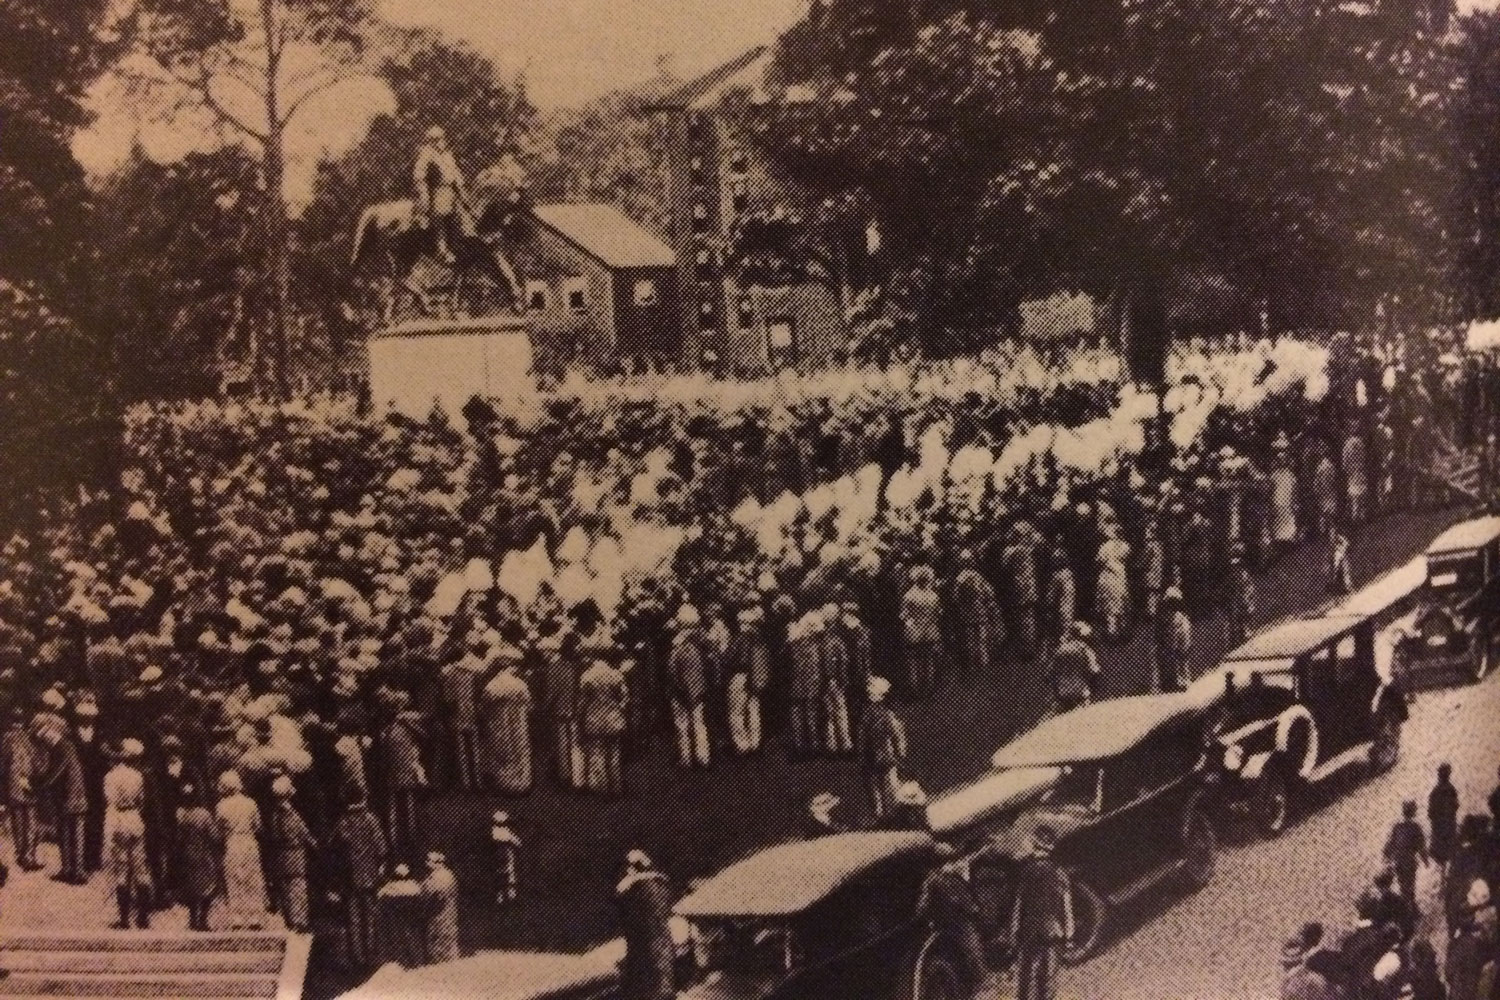 Old image of people gathered at the Lee Statue